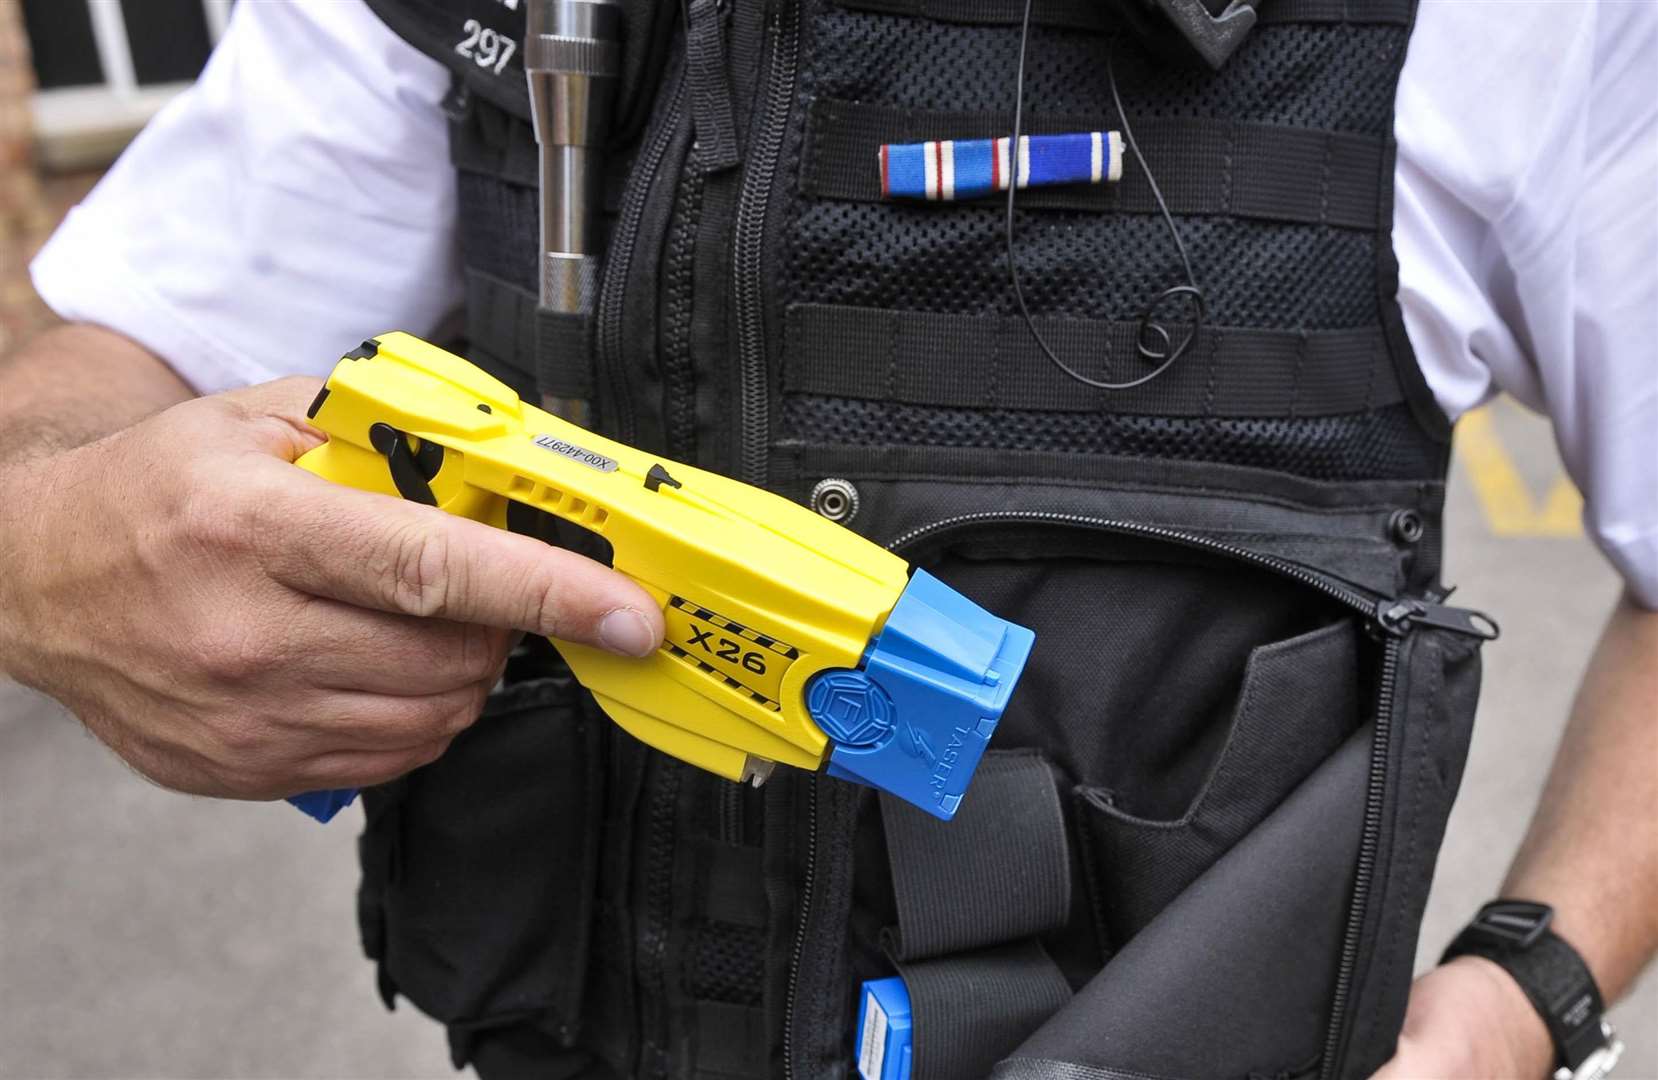 Police were forced to use a taser